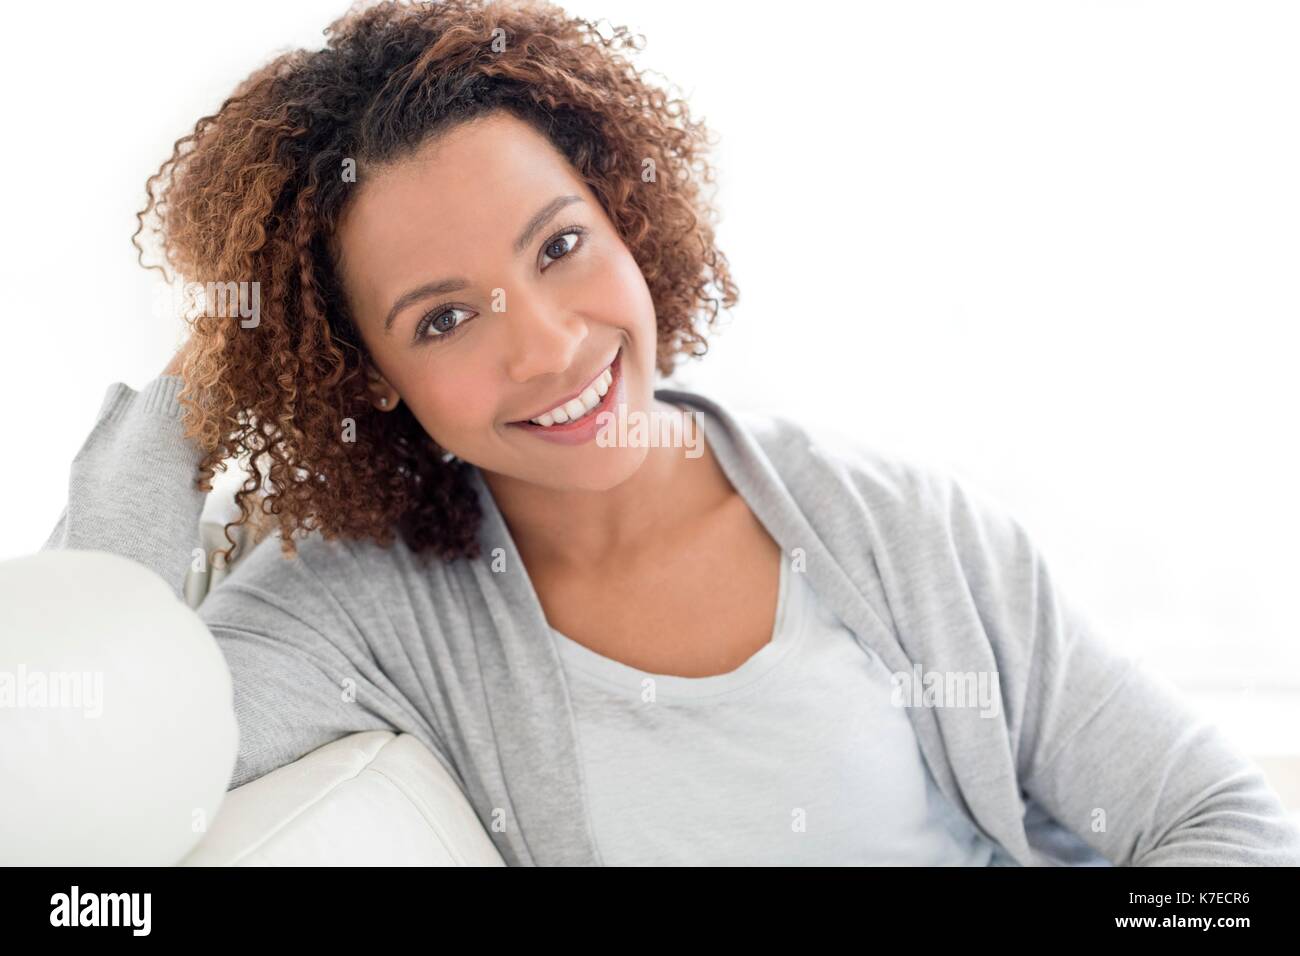 Portrait of mid adult woman smiling. Stock Photo